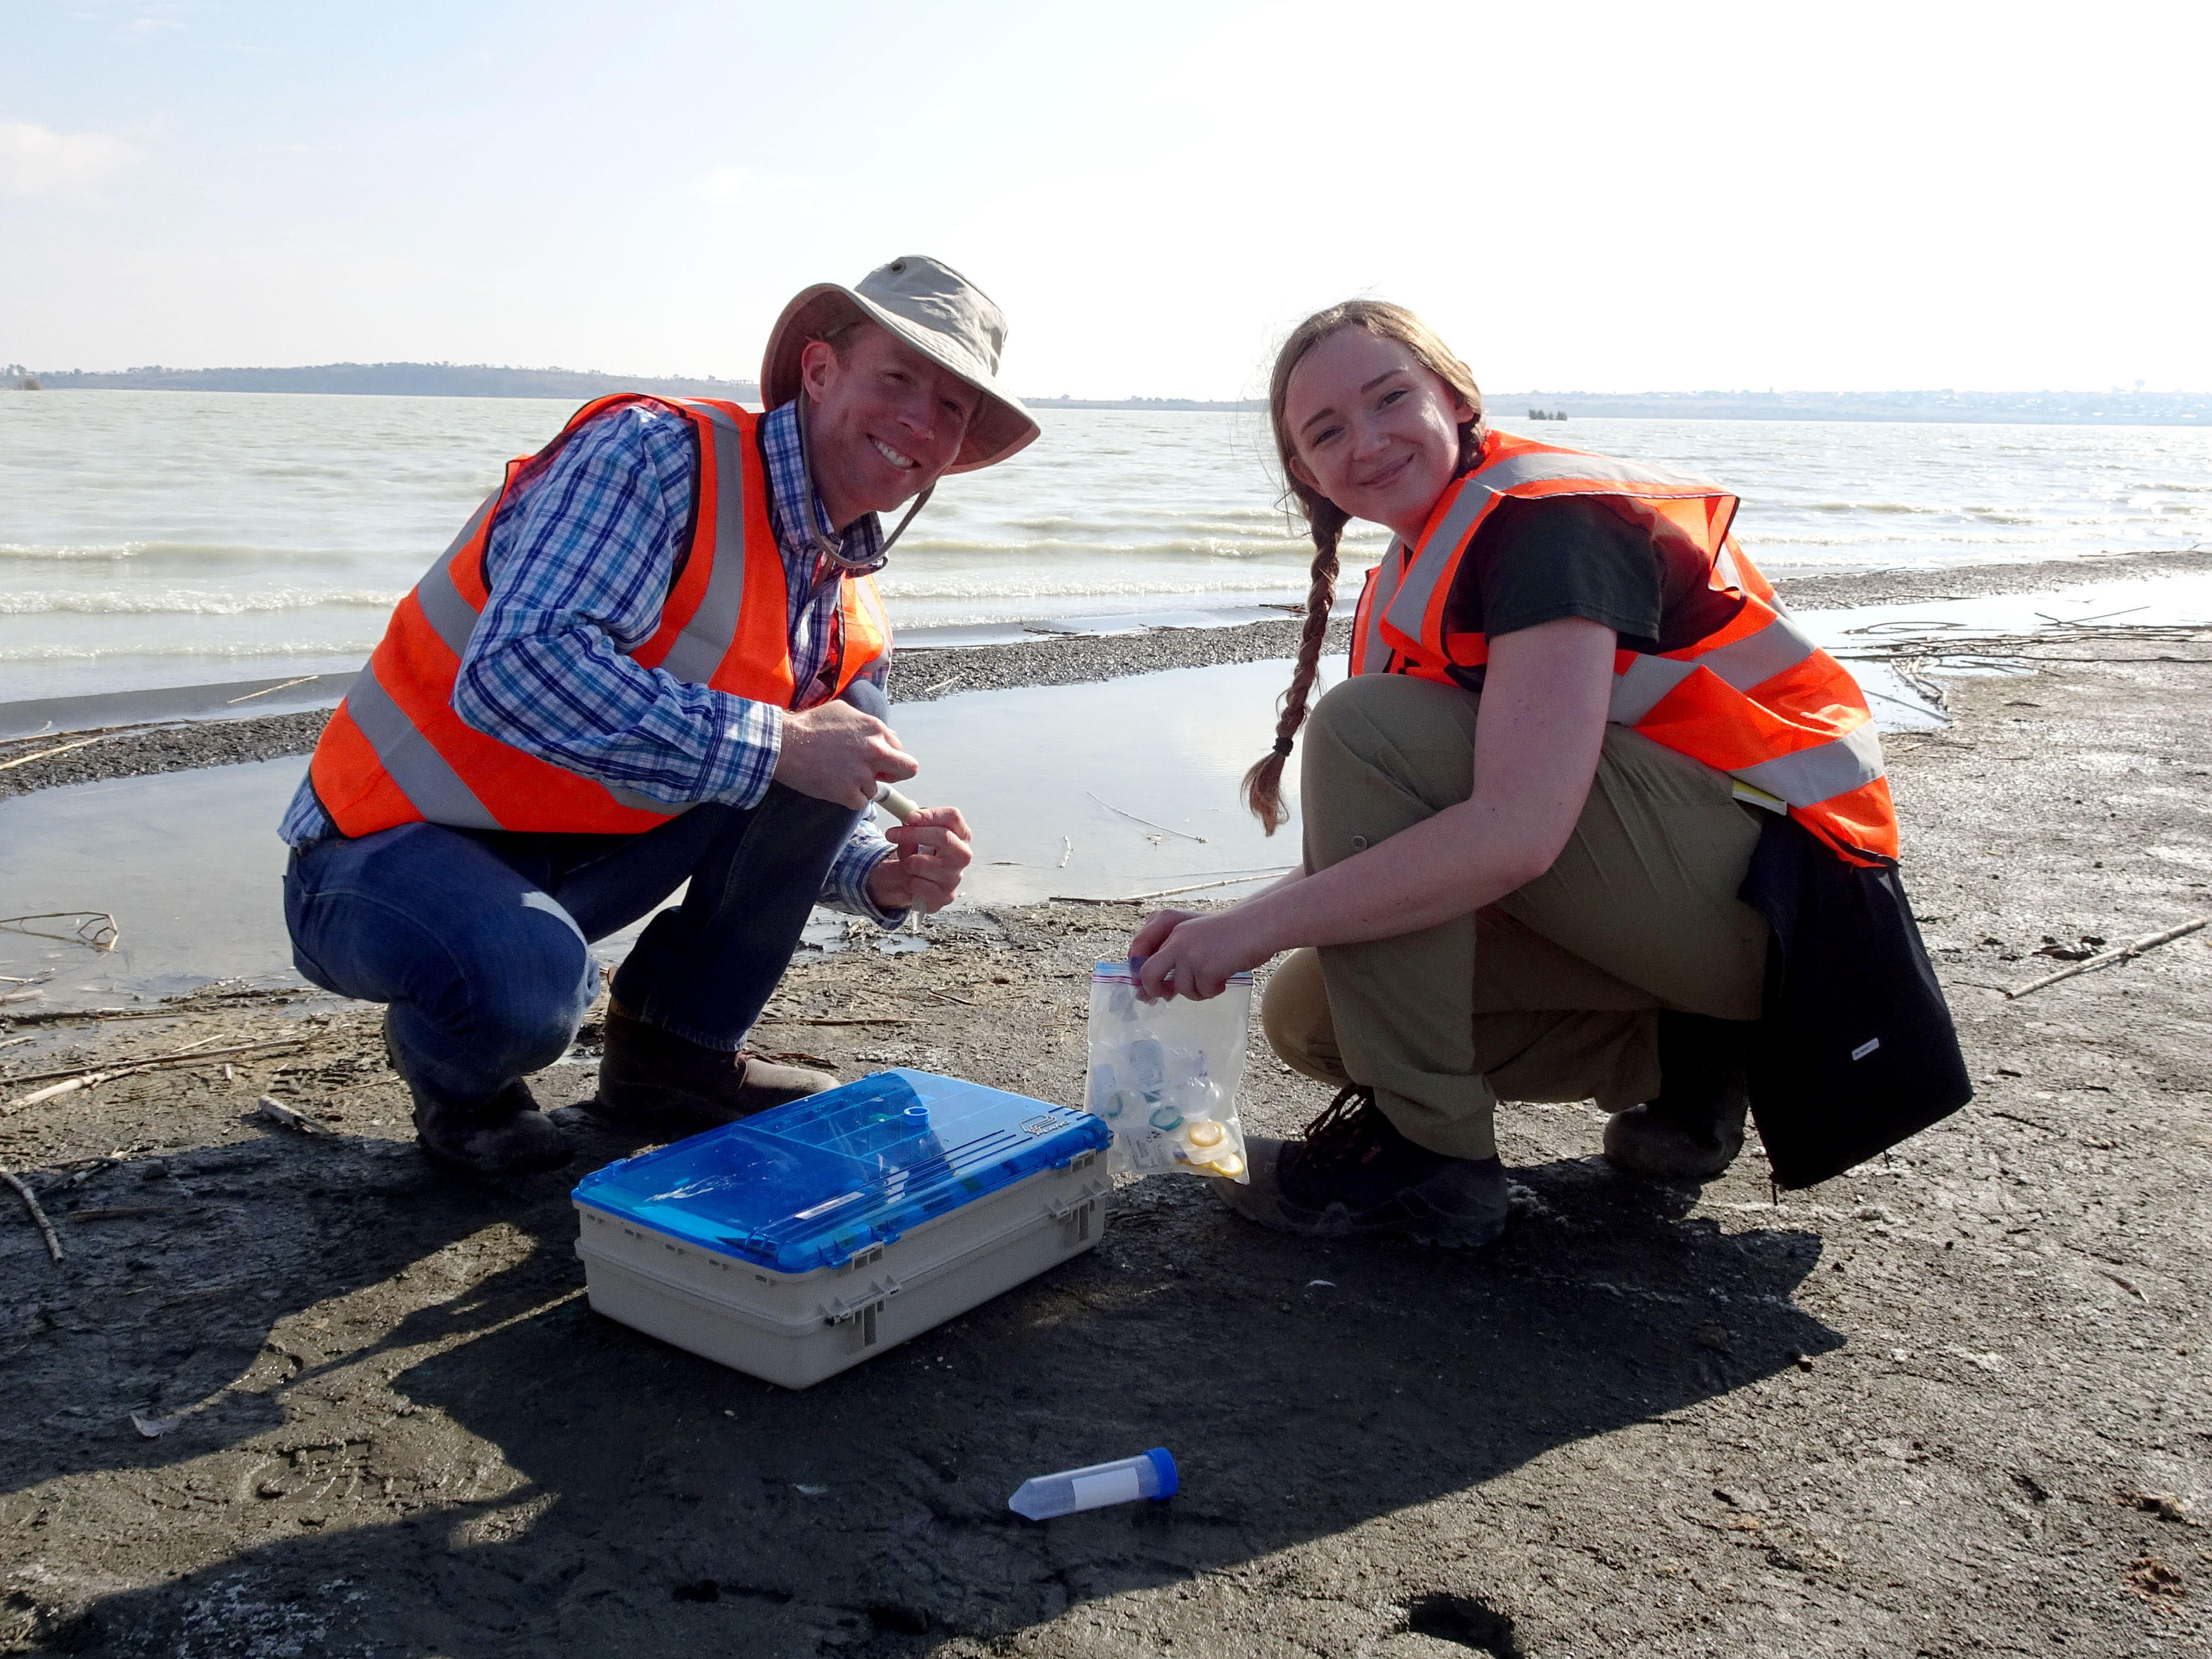 A student and Dr. Ian Power smiling at the camera while collection samples from a beach